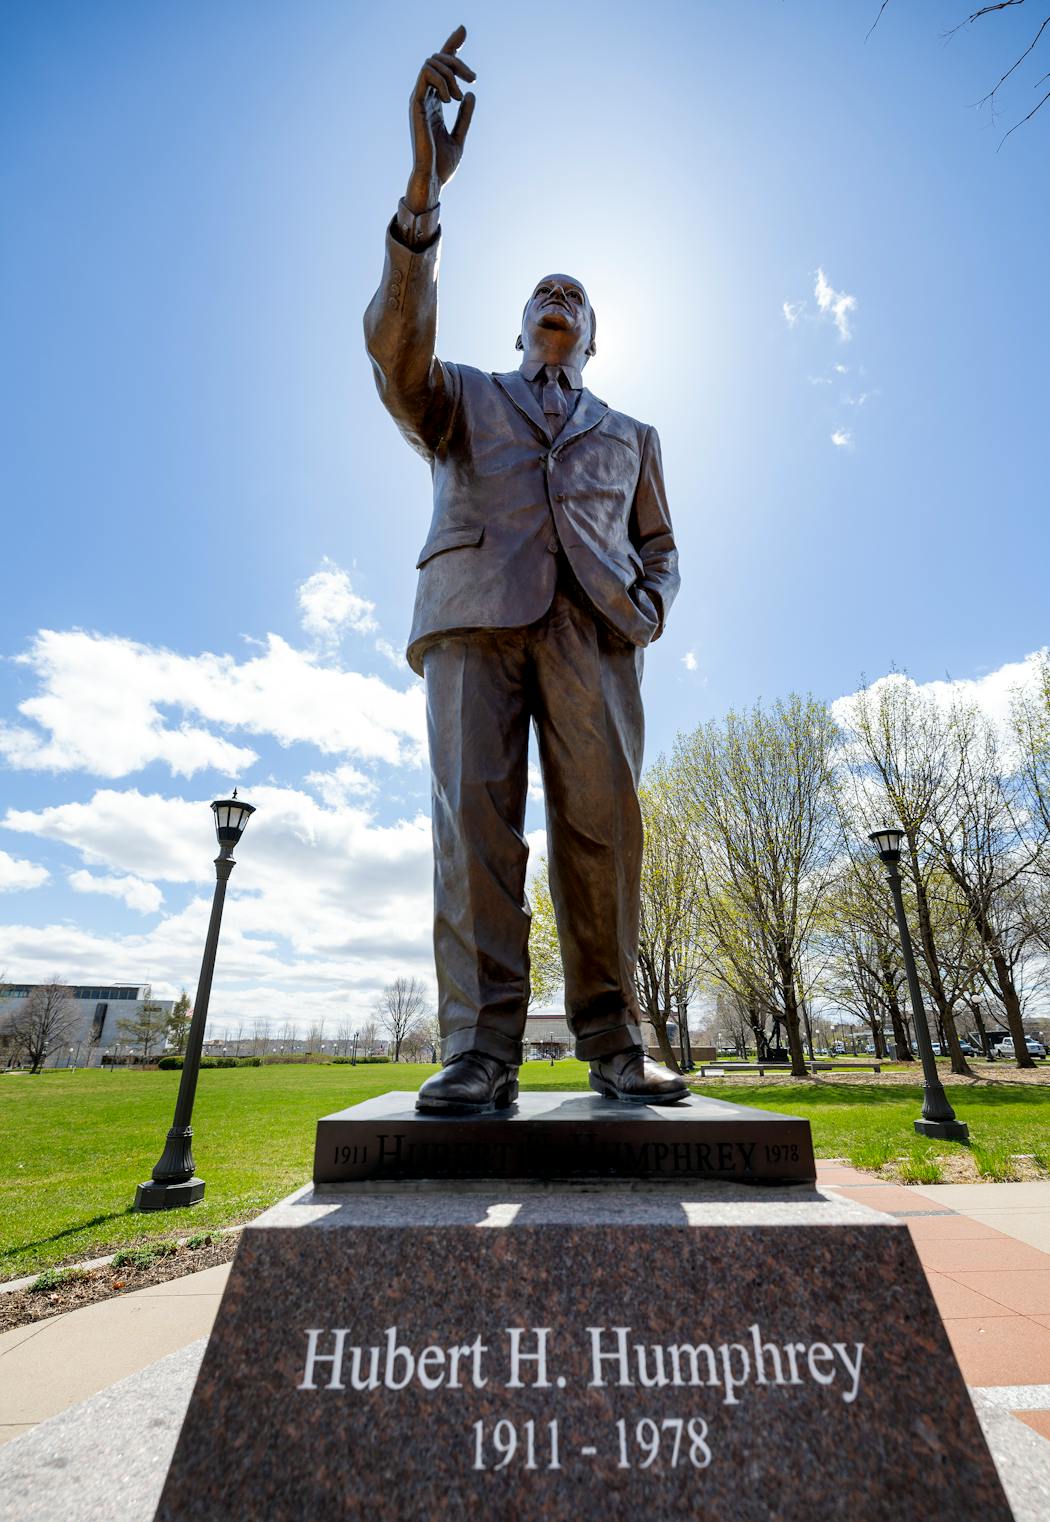 The statue of Hubert H. Humphrey on the Minnesota Capitol mall in St. Paul might soon have a double in Washington, D.C.